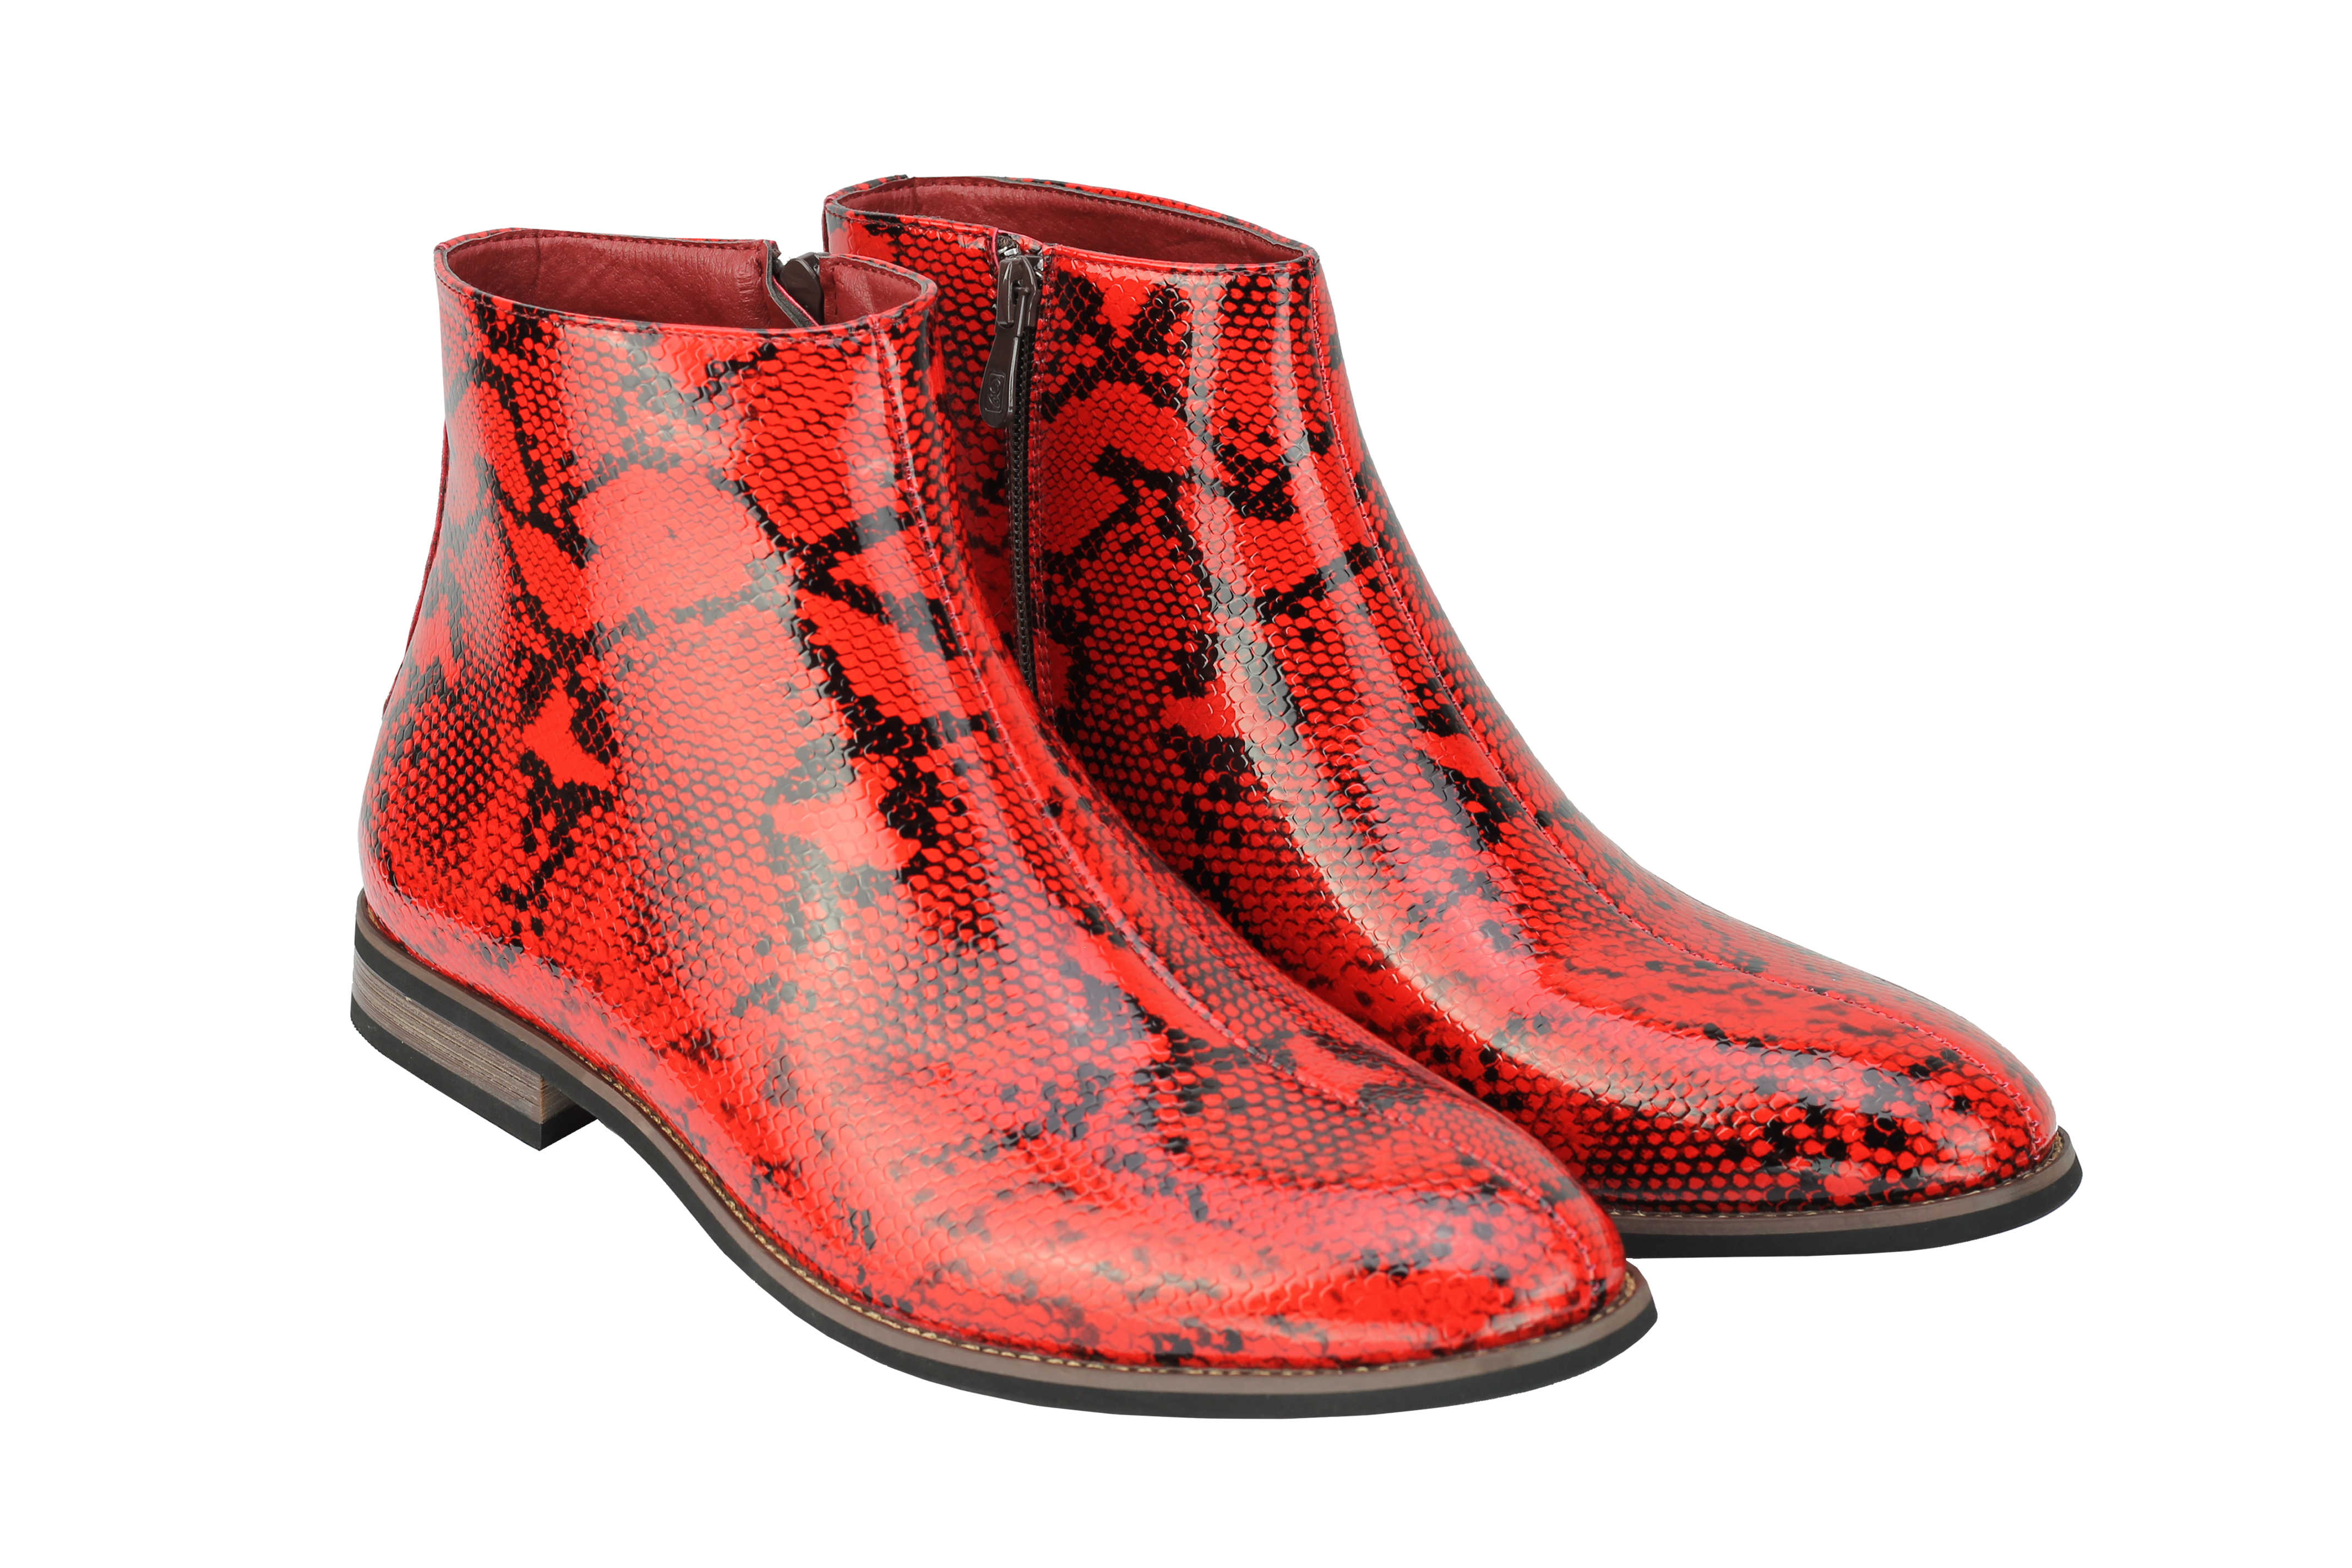 Mens Faux Leather Shiny Snake skin Print Ankle Boots on Chelsea Shoes | eBay